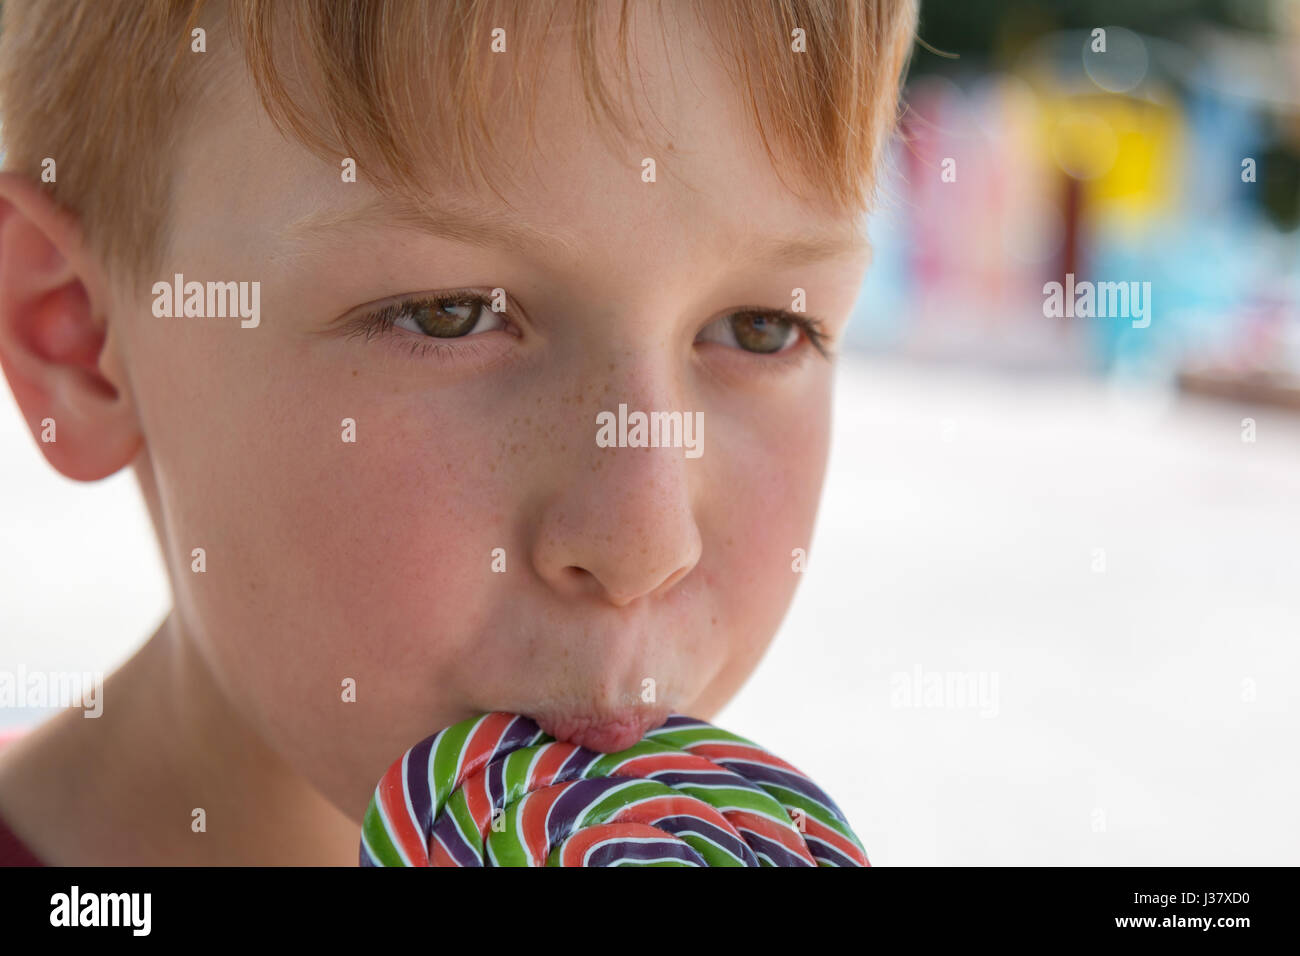 Close up of Eight Years Child Licking Colorful Round Lollipop Stock Photo